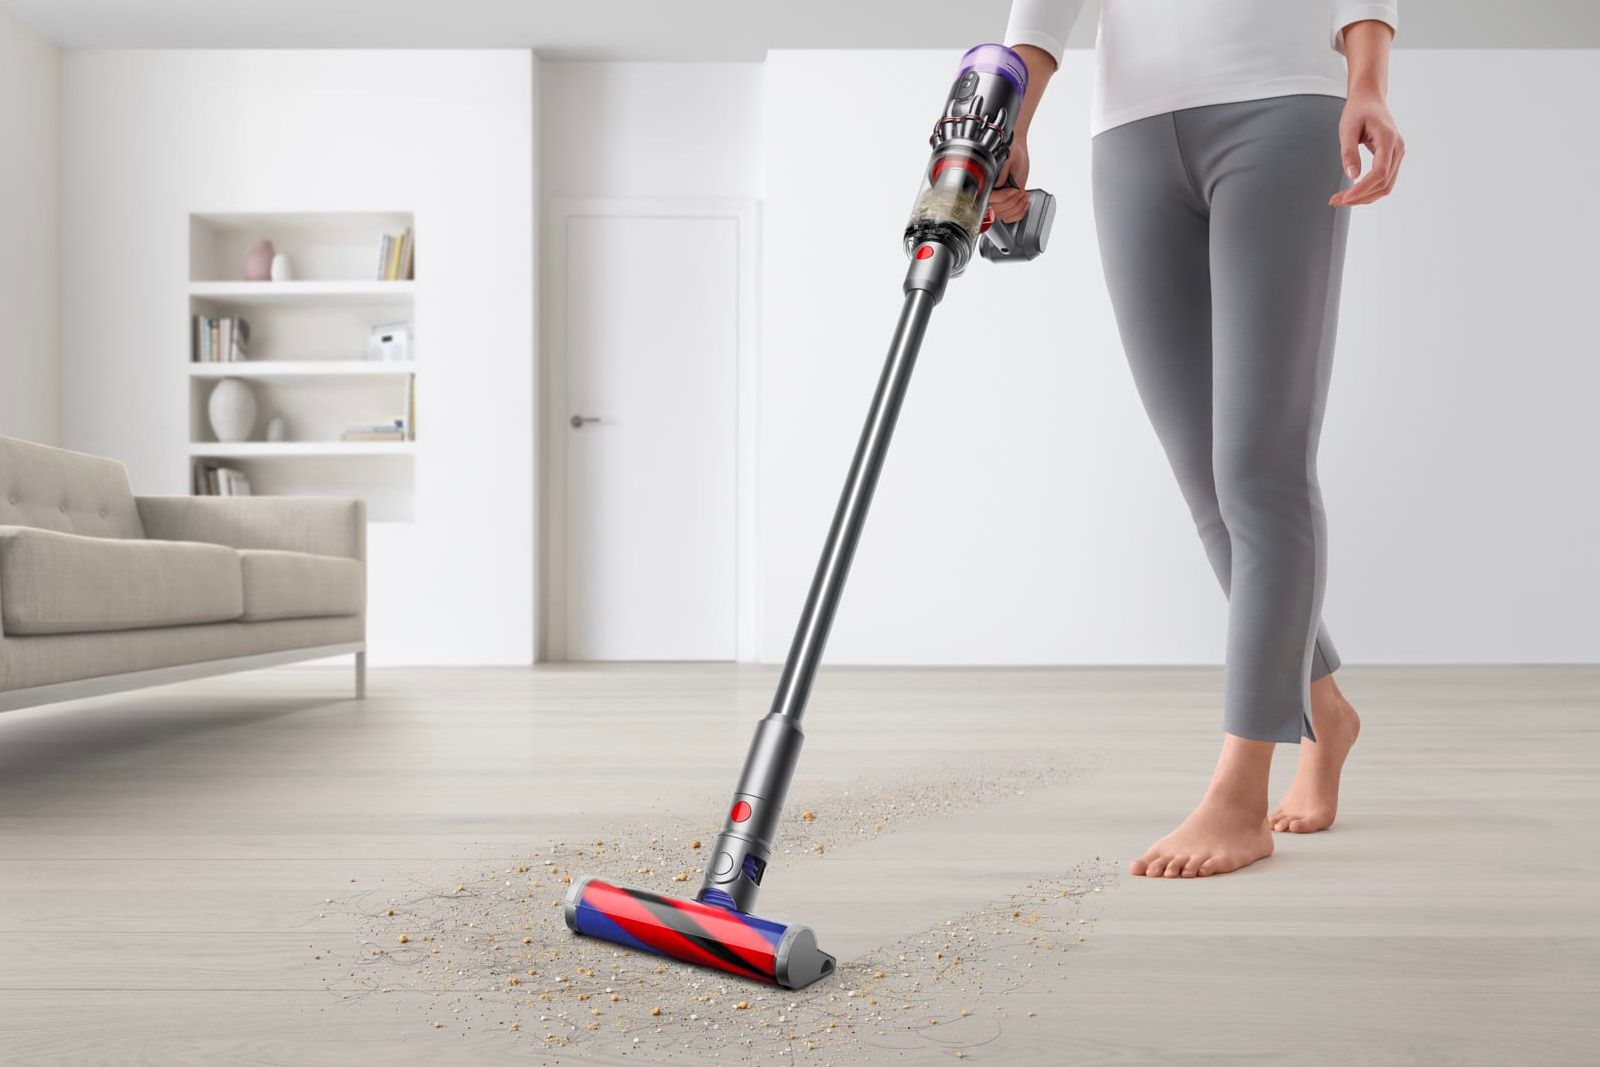 Dyson launches three new vacuums in the UK - Outsize Absolute, Micro 1.5kg and Omni-glide photo 1